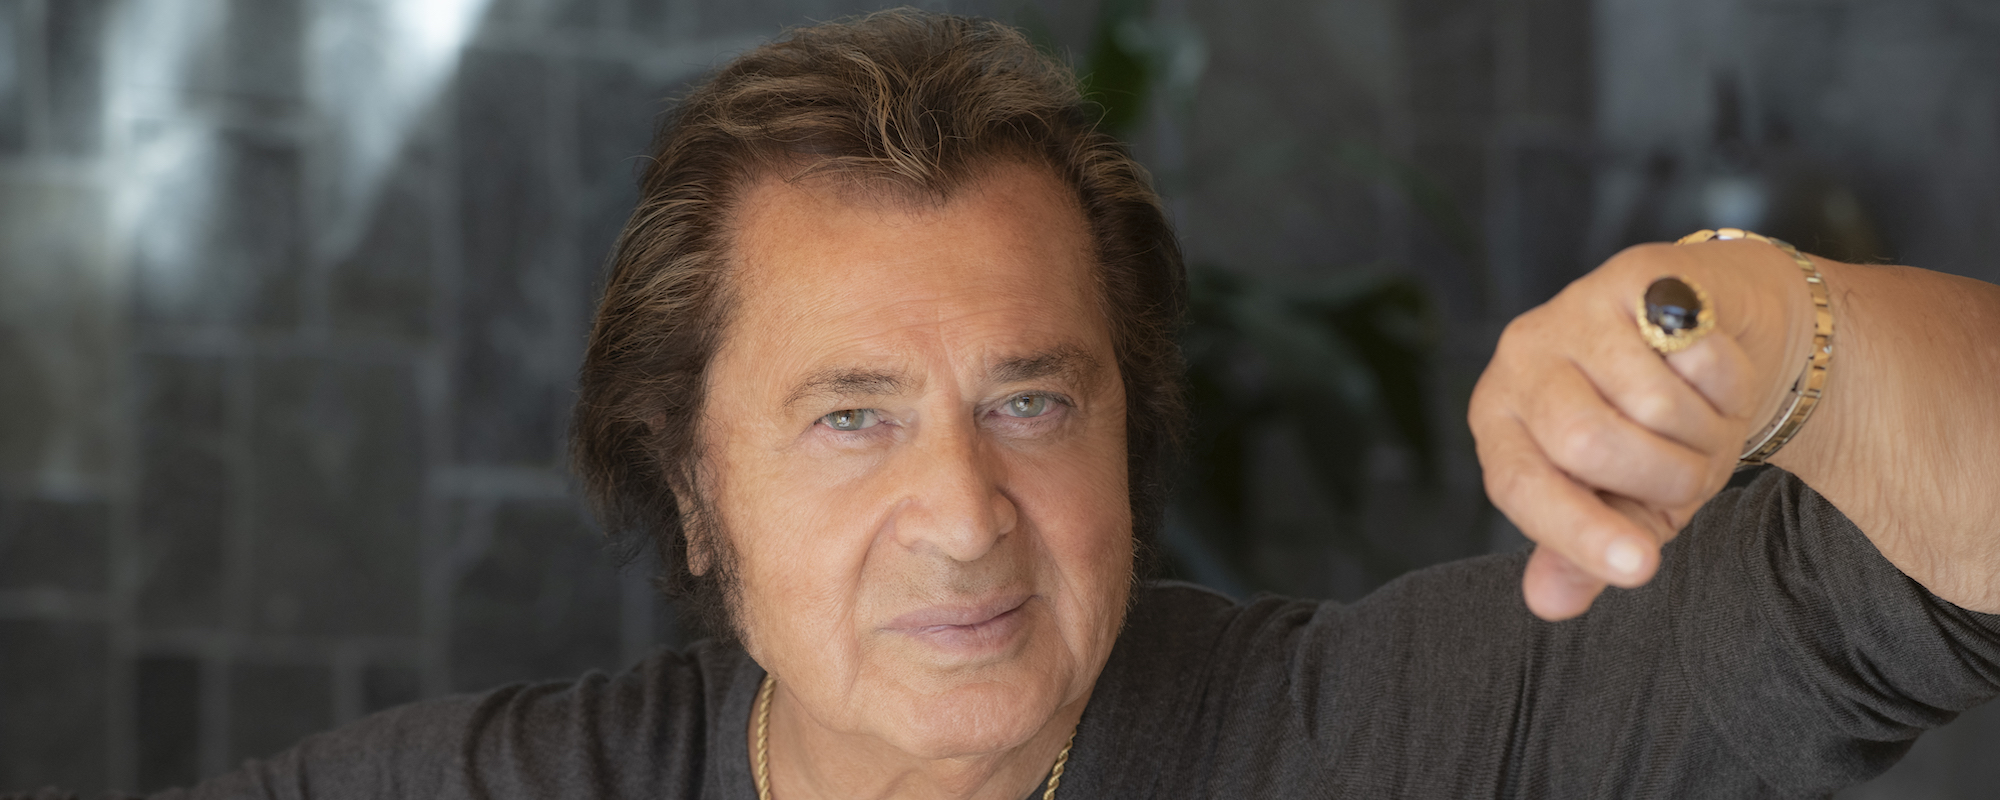 Engelbert Humperdinck to Commemorate 87th Birthday with Album ‘All About Love’